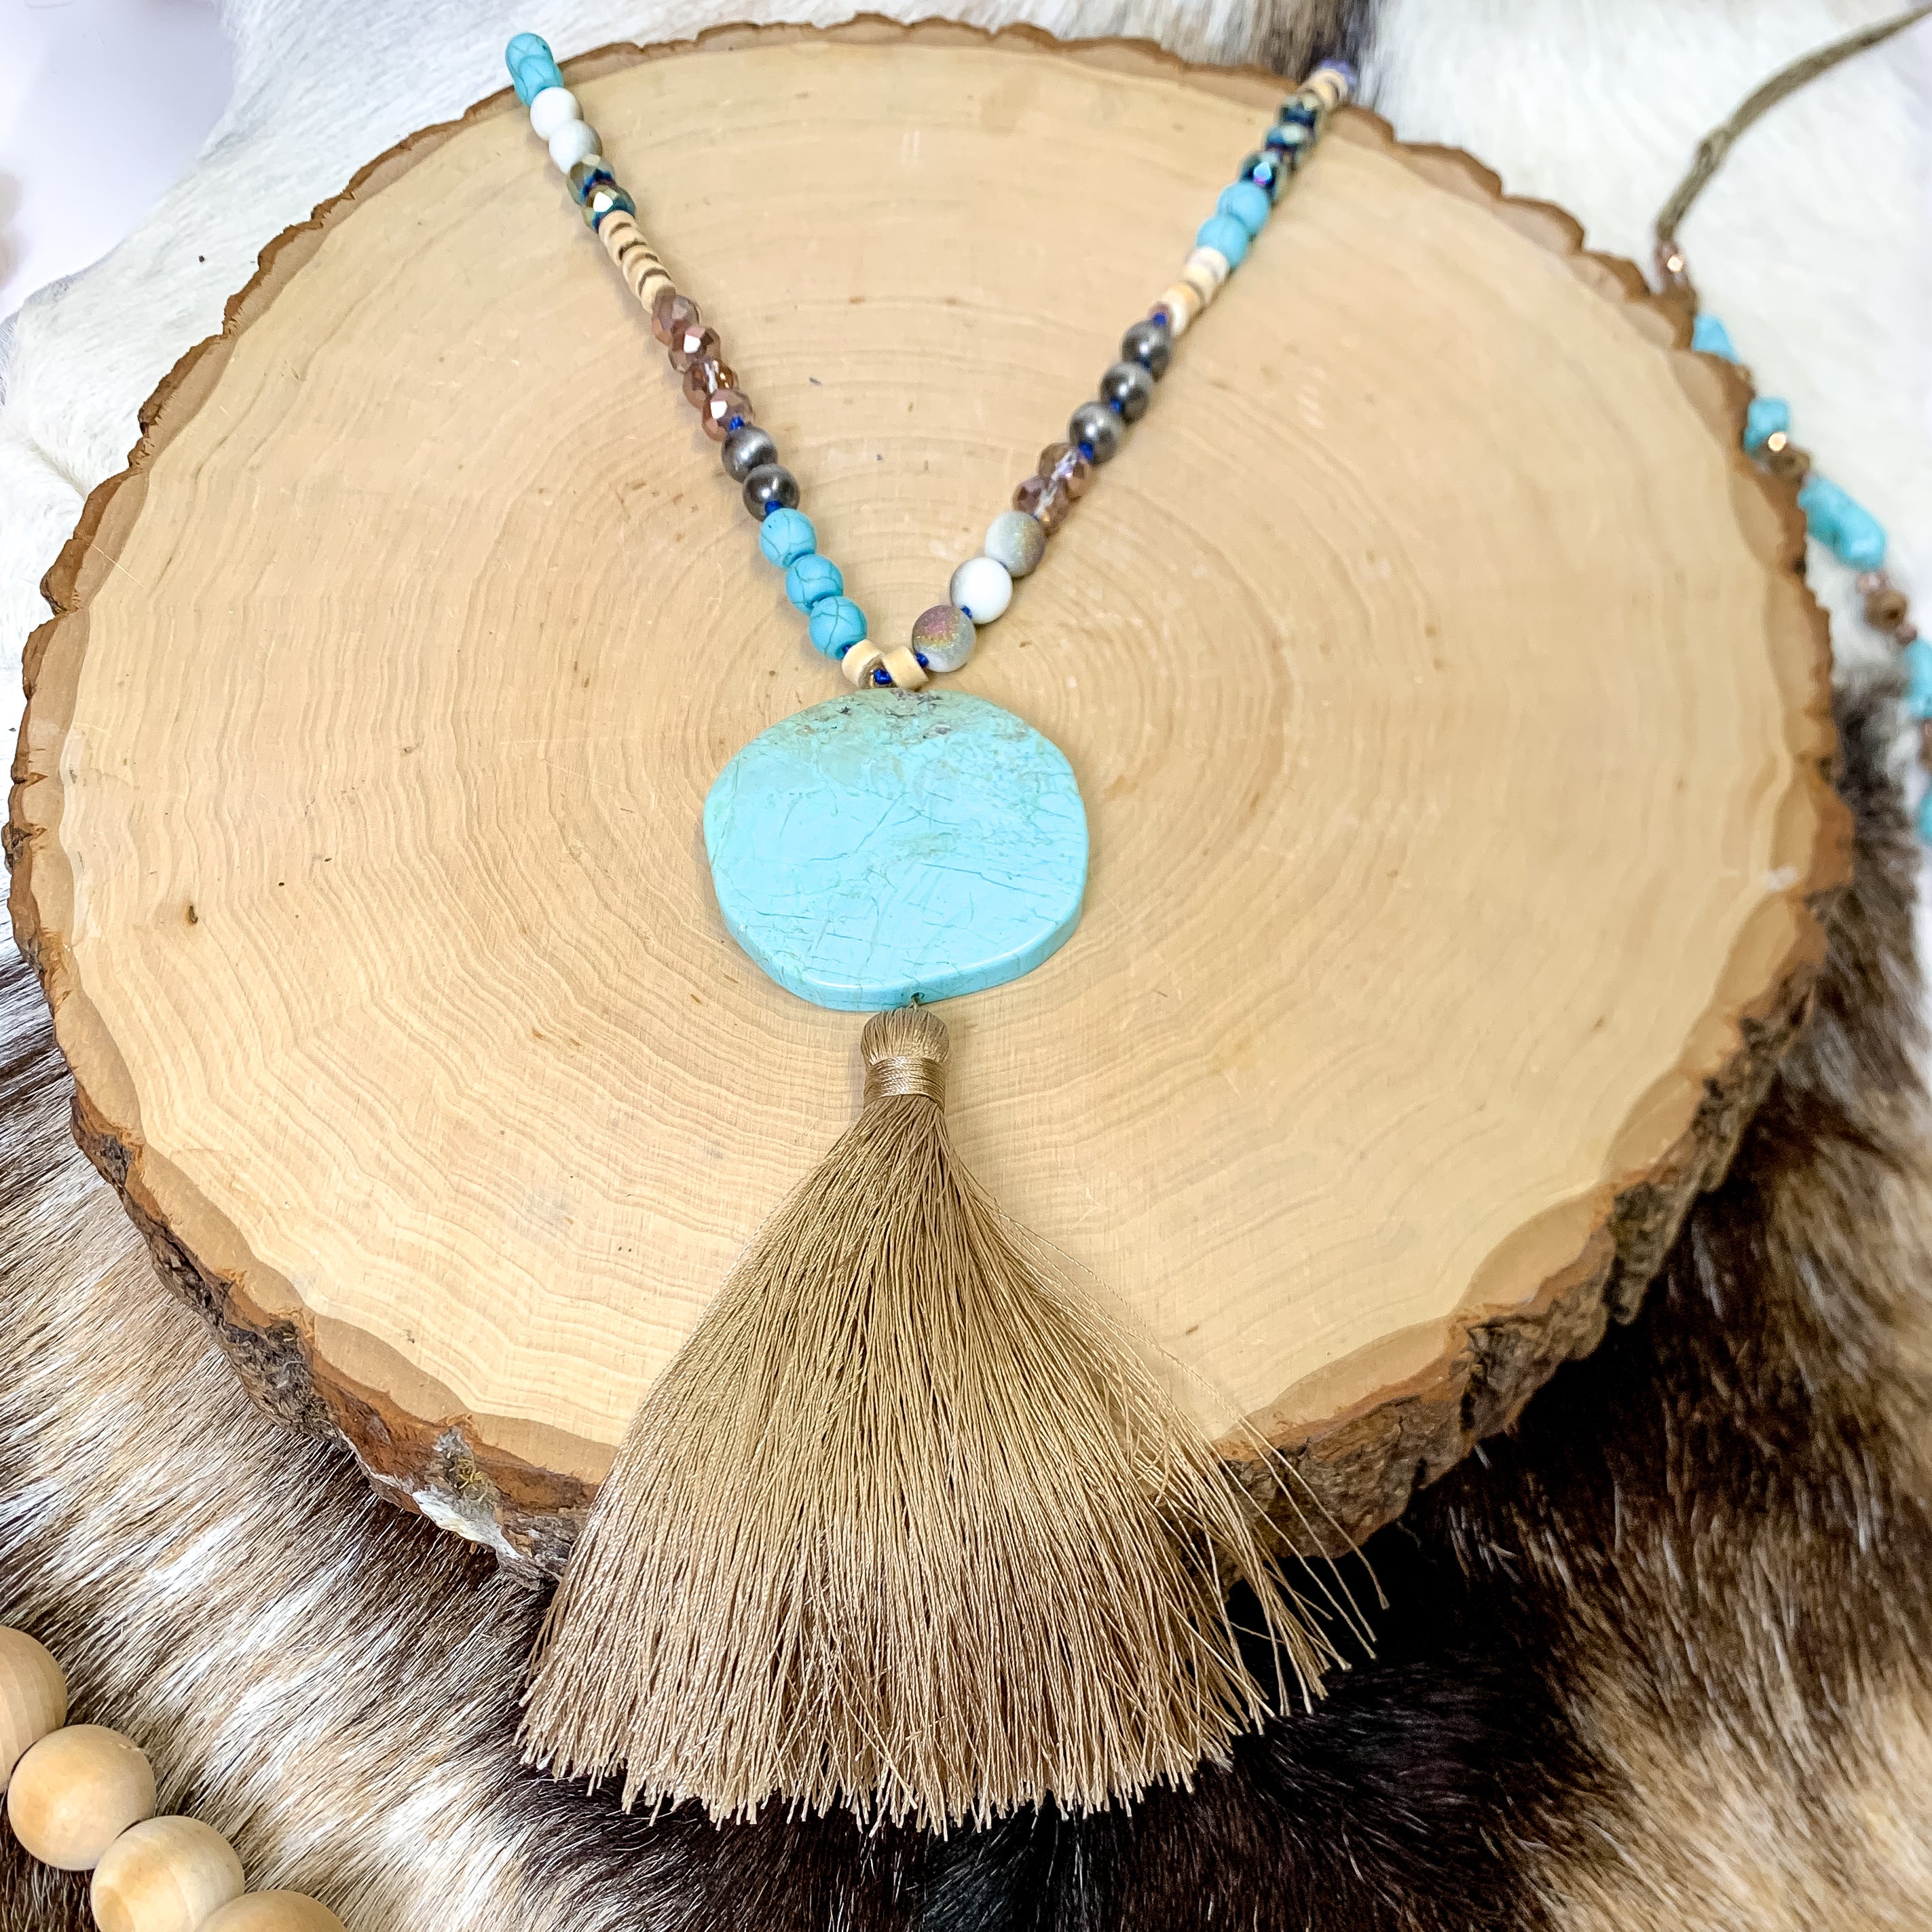 Beaded Necklace with Turquoise Slab Pendant and Tassel